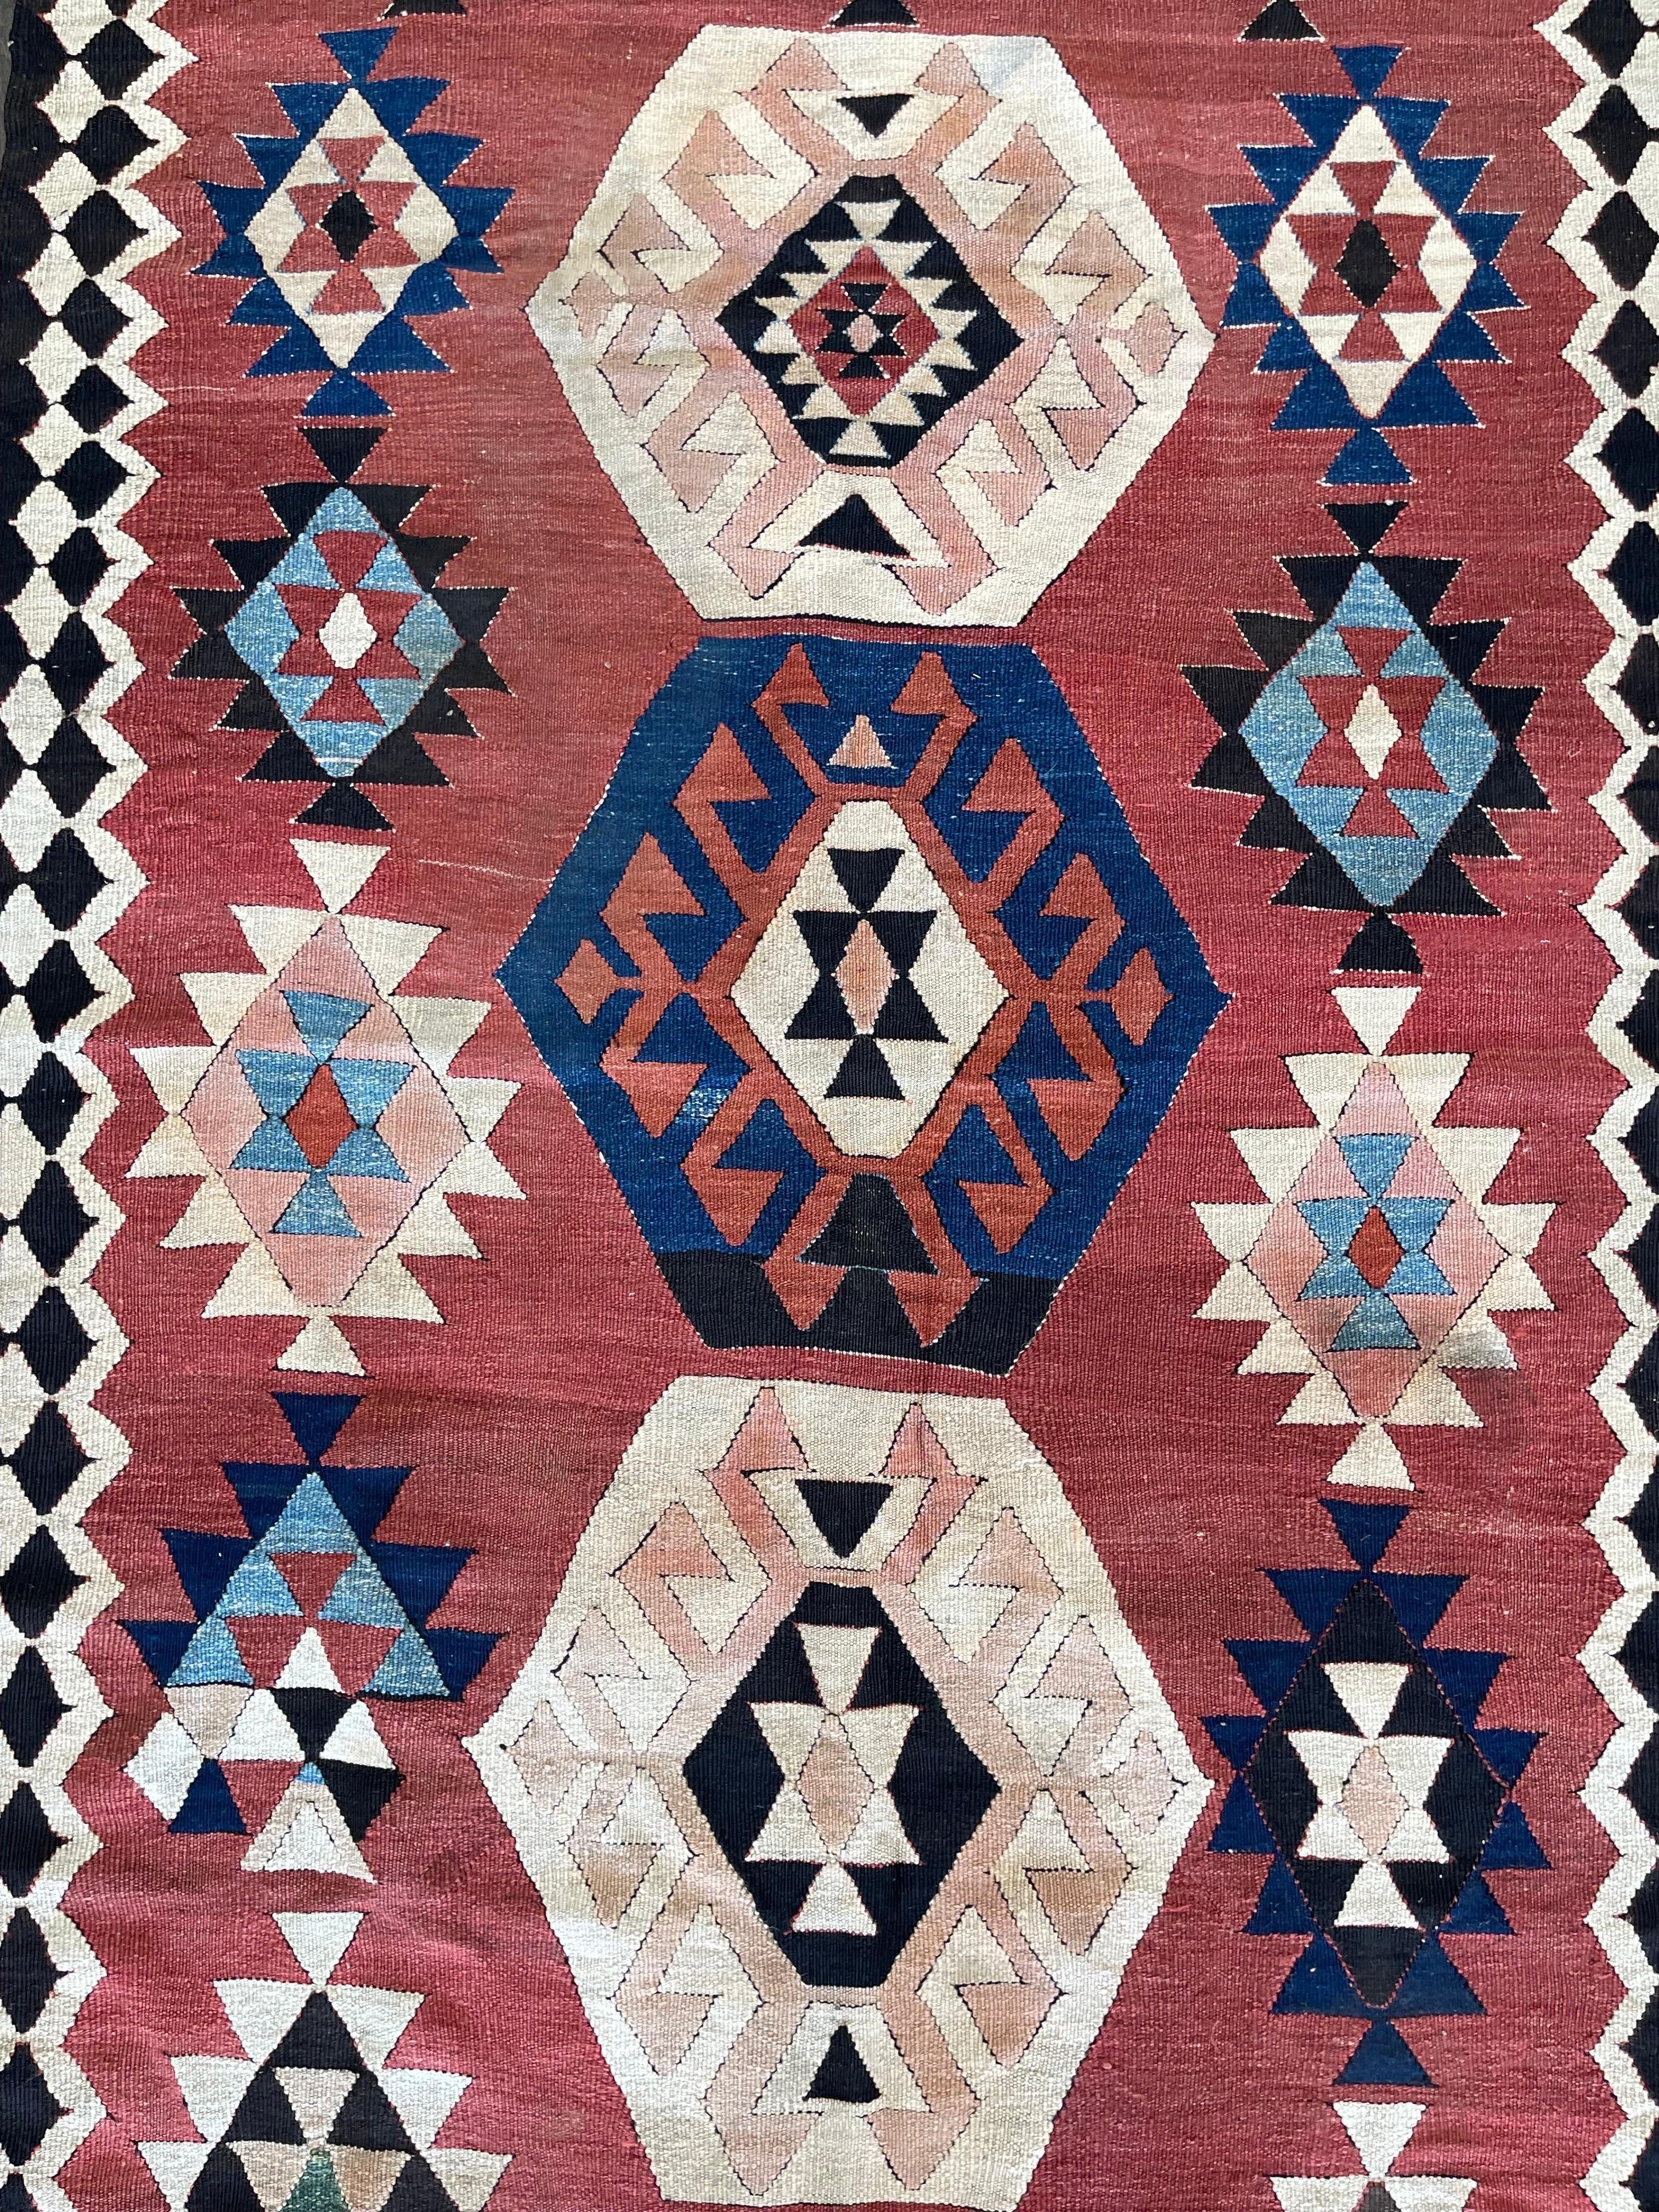 A beautiful antique Caucasian flat weave Kilim attributed to the town of Shirvan in the caucasus mountain featuring a soft salmon/orange field decorated by three hexagon shaped medallions one in blue and two in beige colors, surrounded by forteen